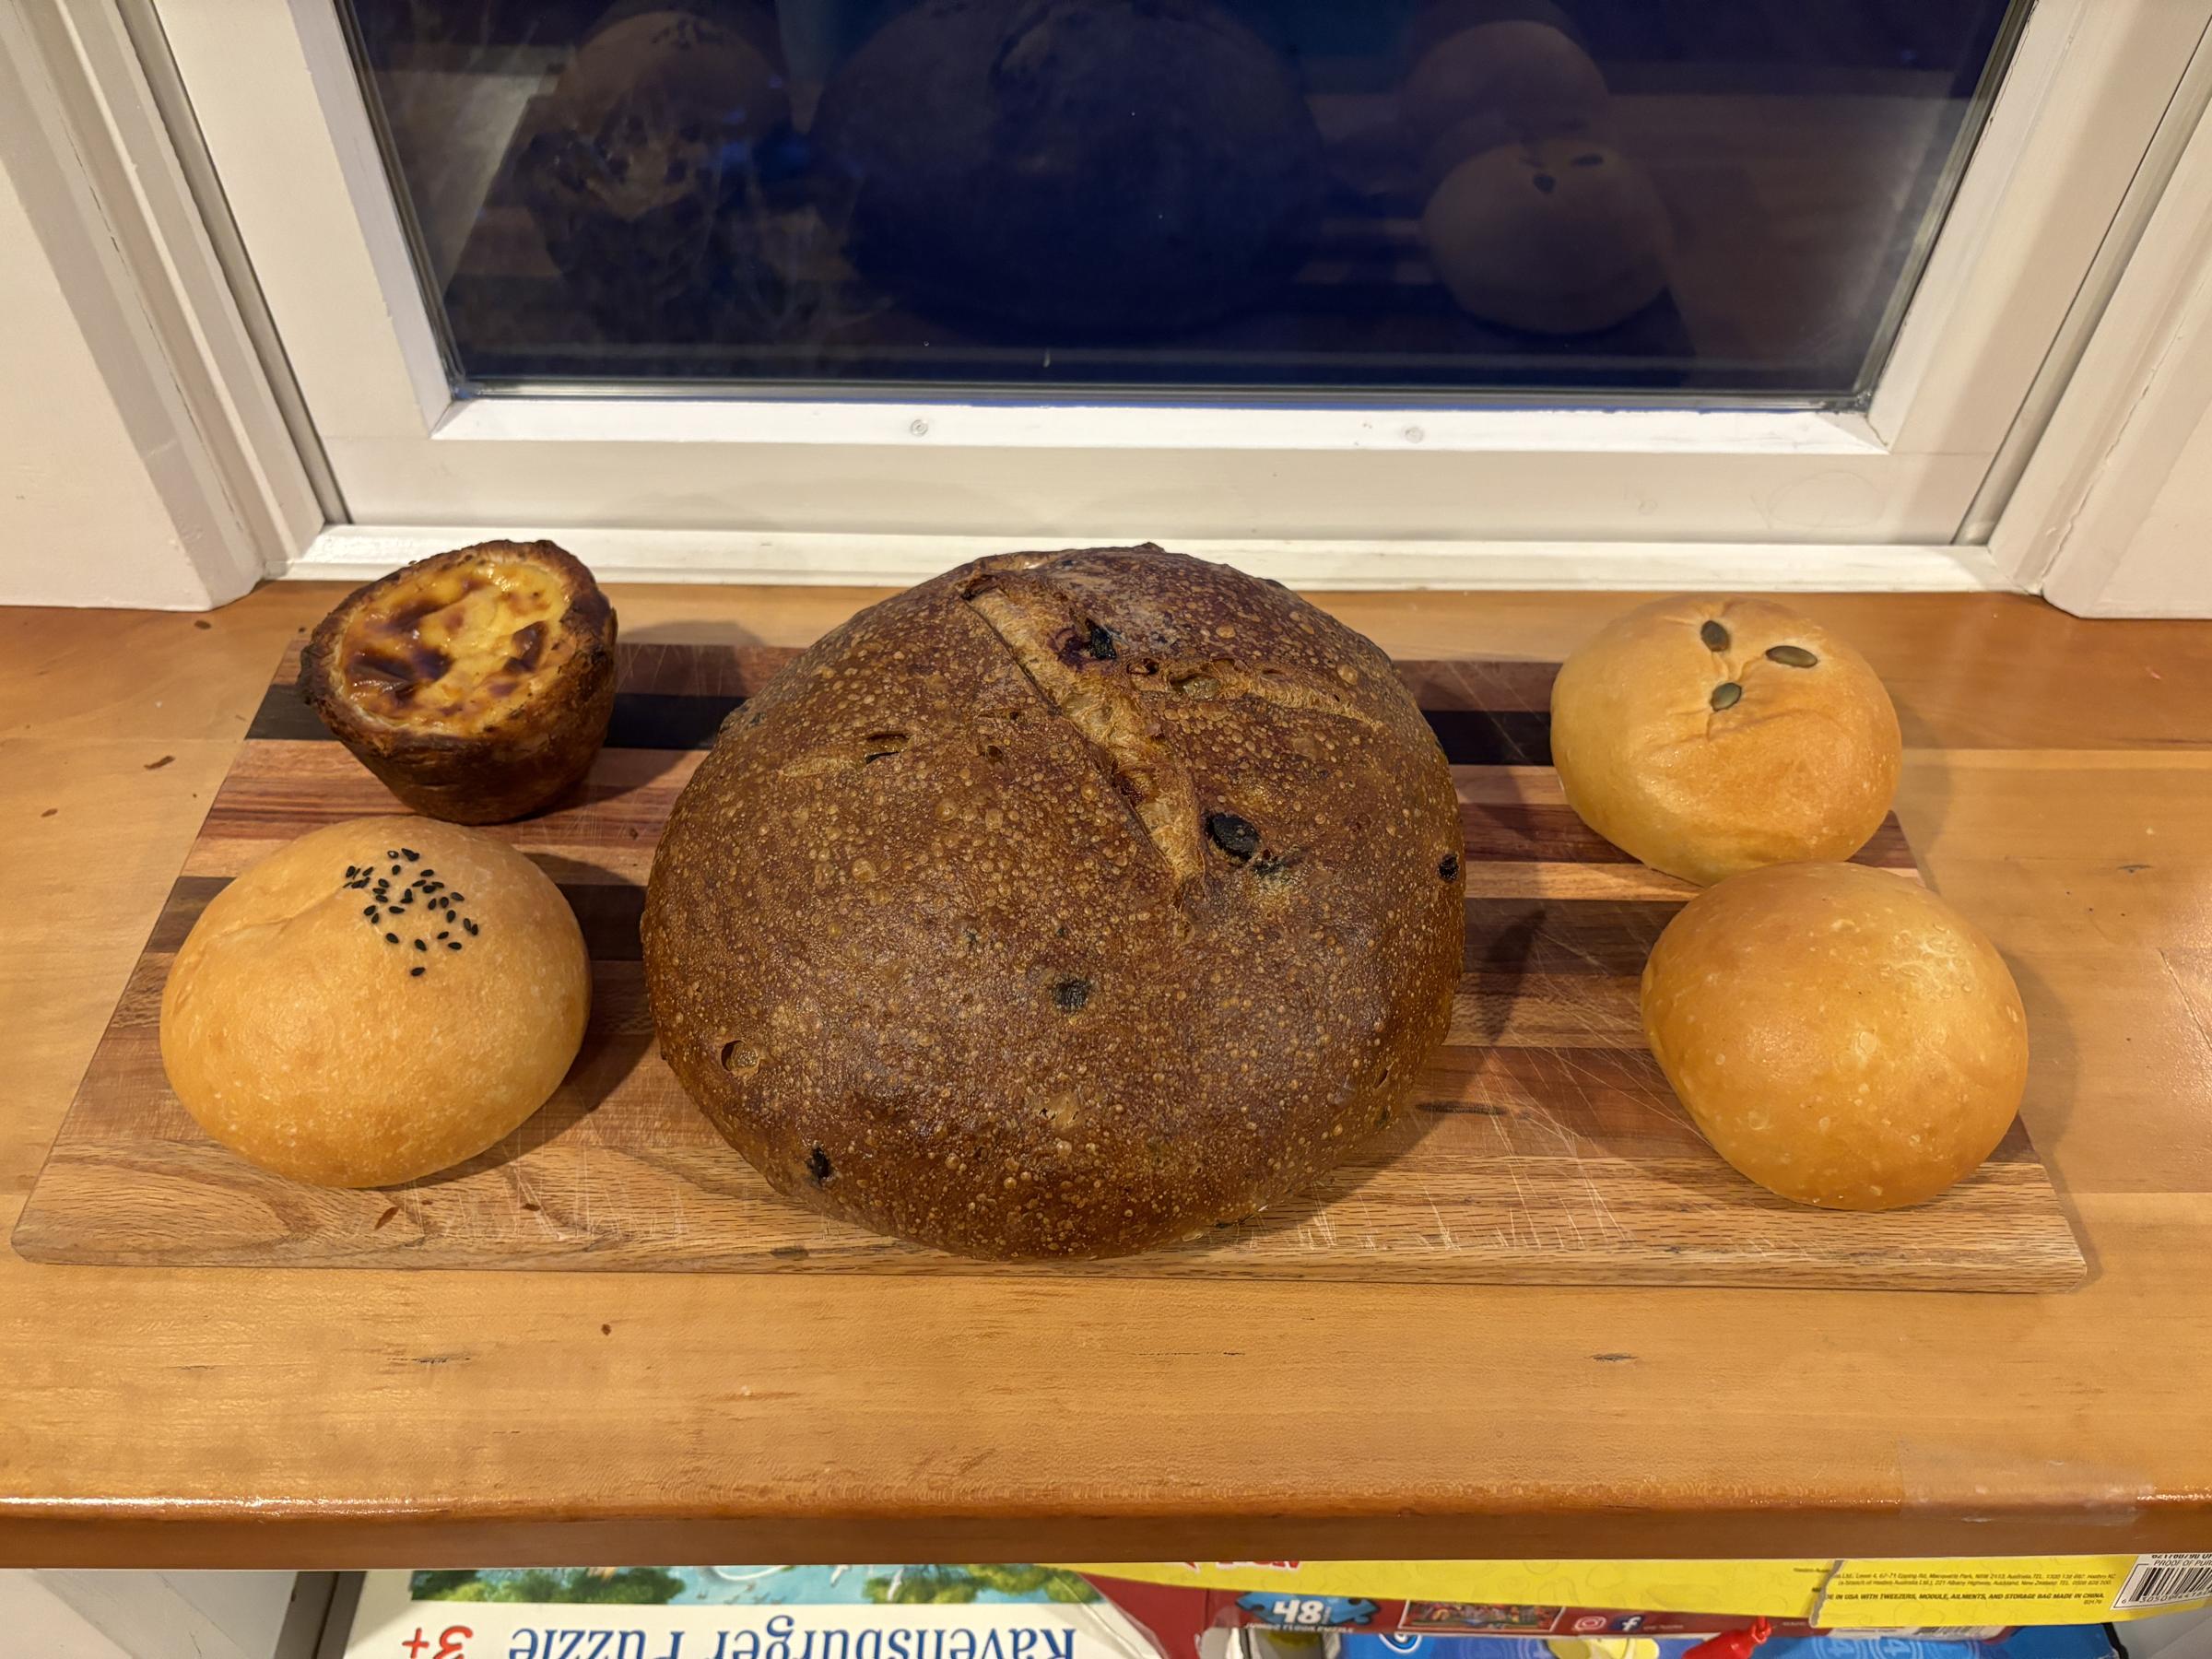 The Foundry Bakery - A Must Visit For Buns, Bread, and Baked Goods